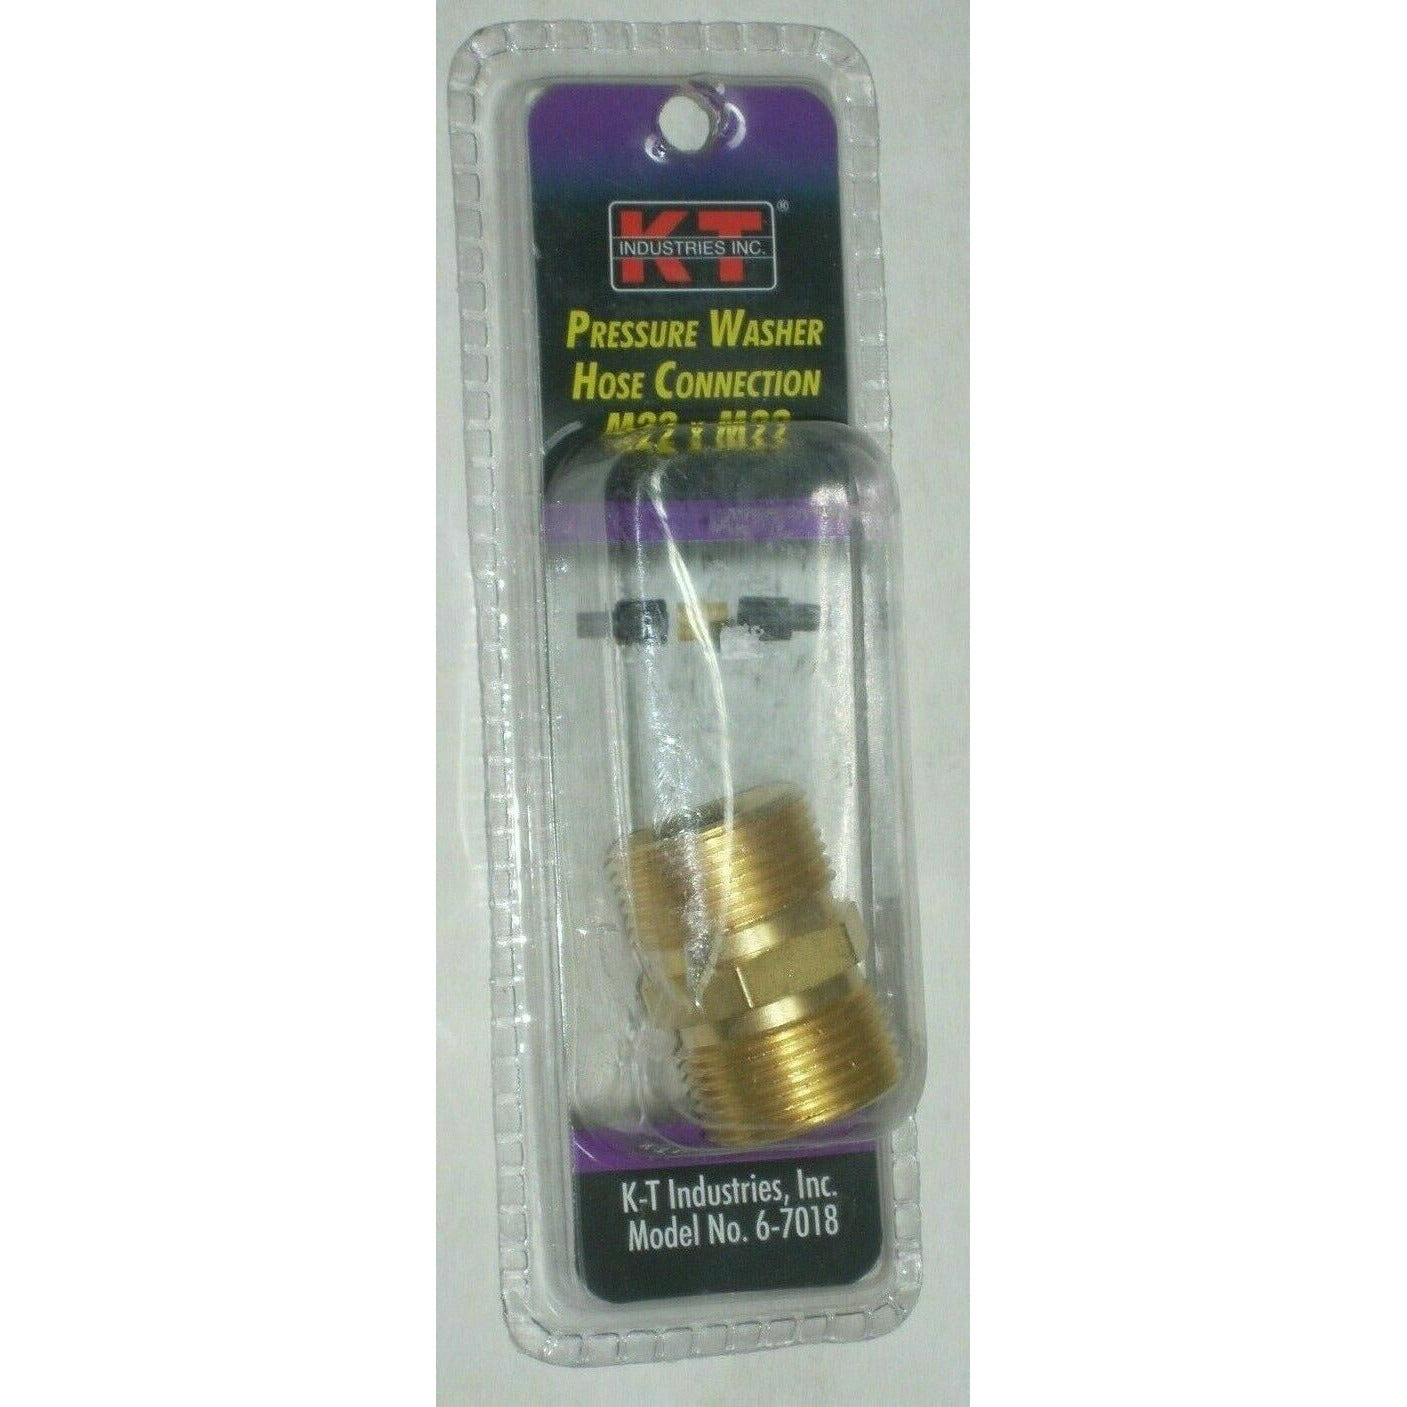 KT Industries 6-7018 Brass Hose Connector M22M x M22M for Pressure Washer